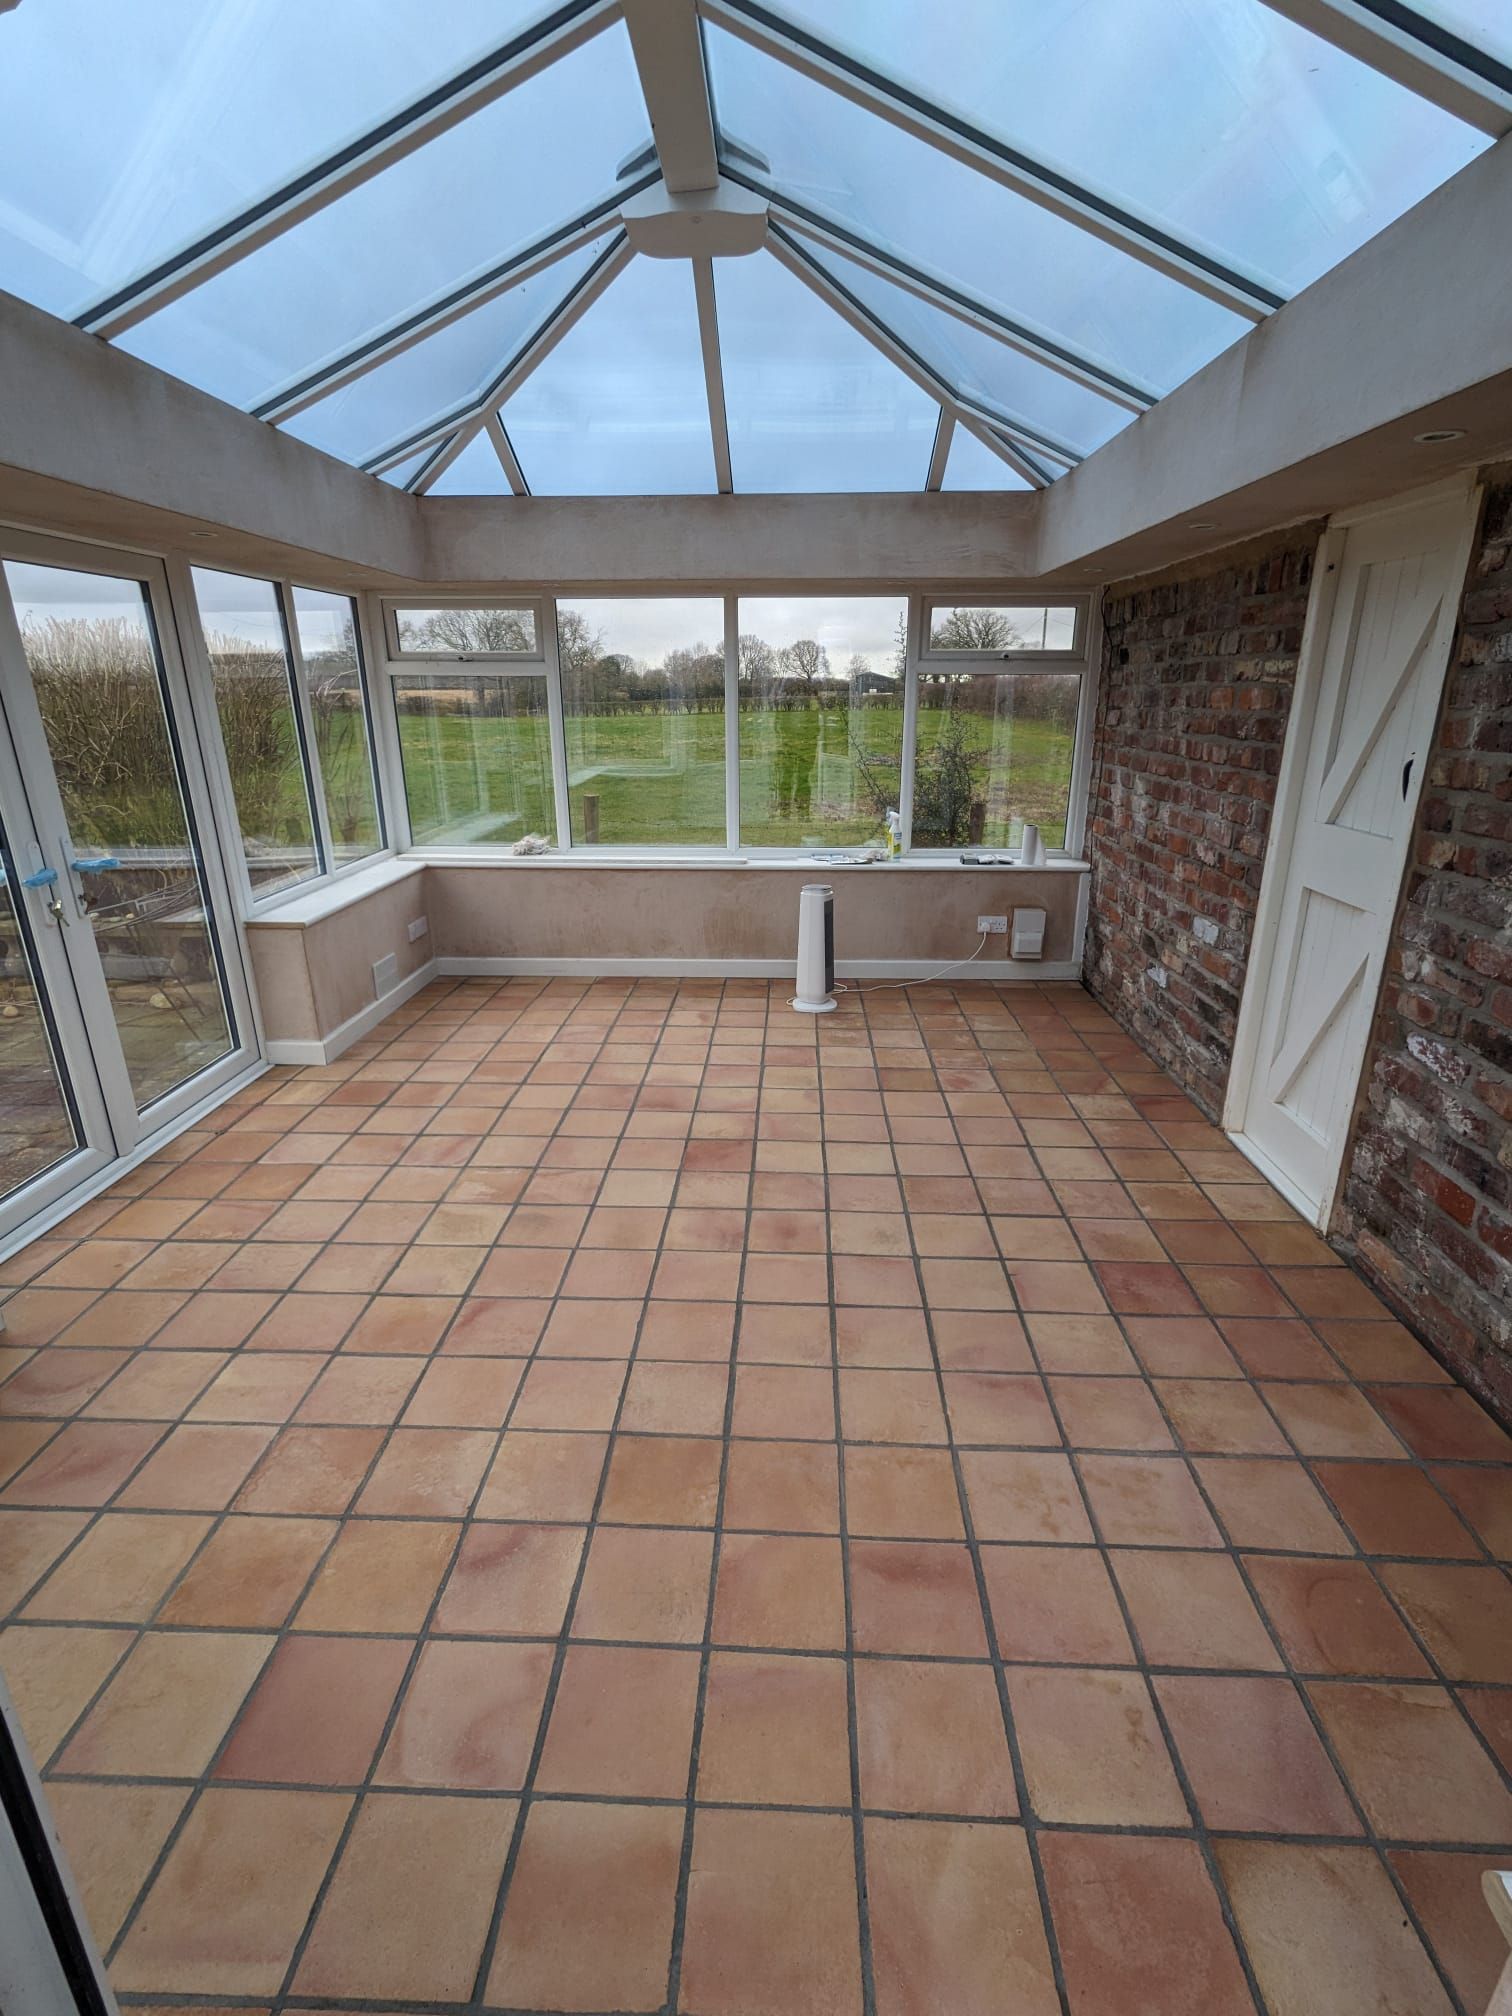 TERRACOTTA TILES AND GROUT DEEP CLEANING AND SEALING IN KNUTSFORD, CHESHIRE